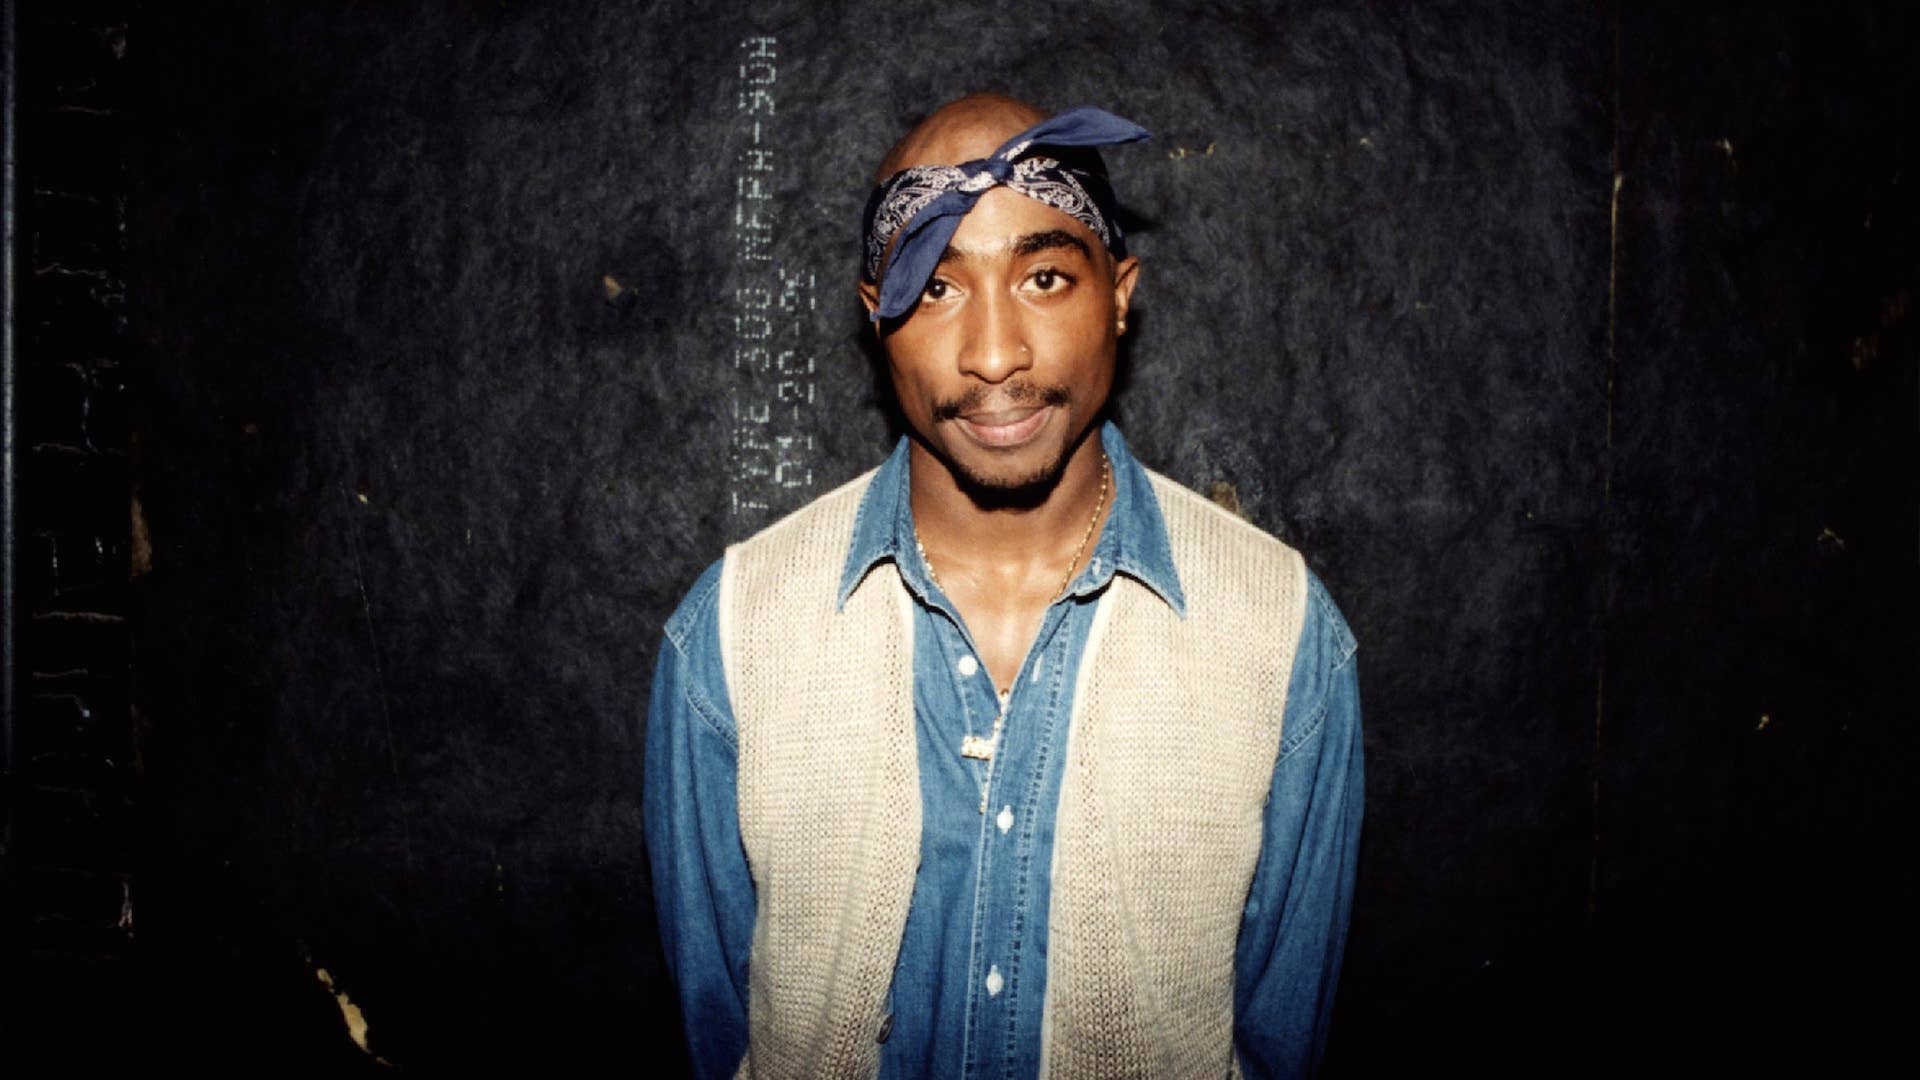 Rapper Tupac Shakur poses for photos backstage after his performance